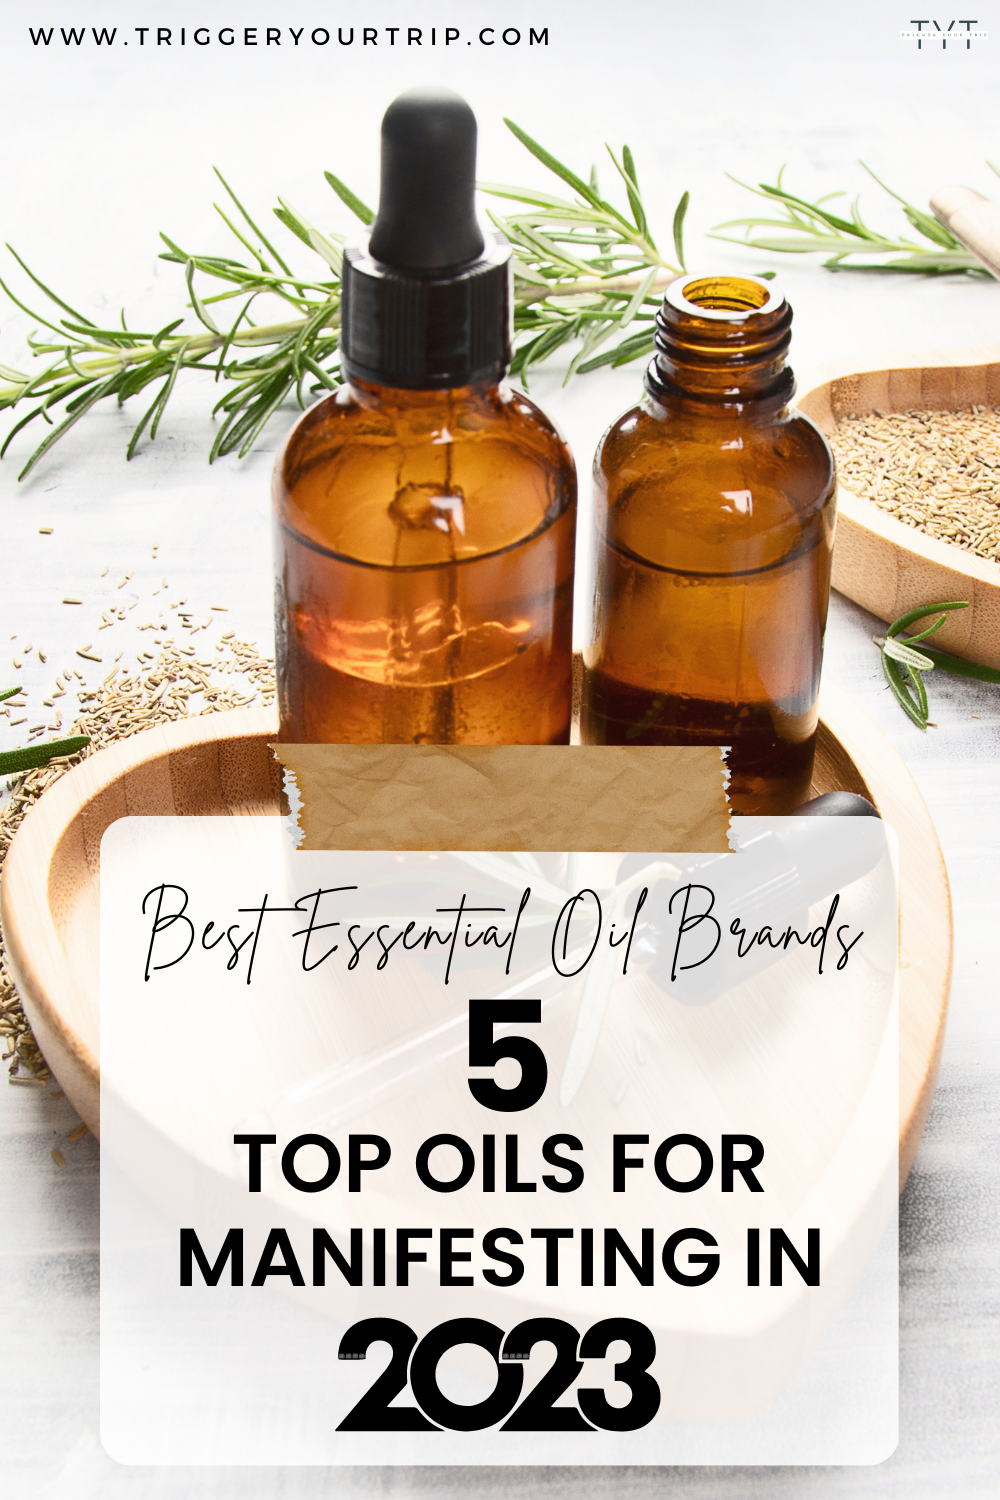 The five best essential oil brand for manifesting in 2023